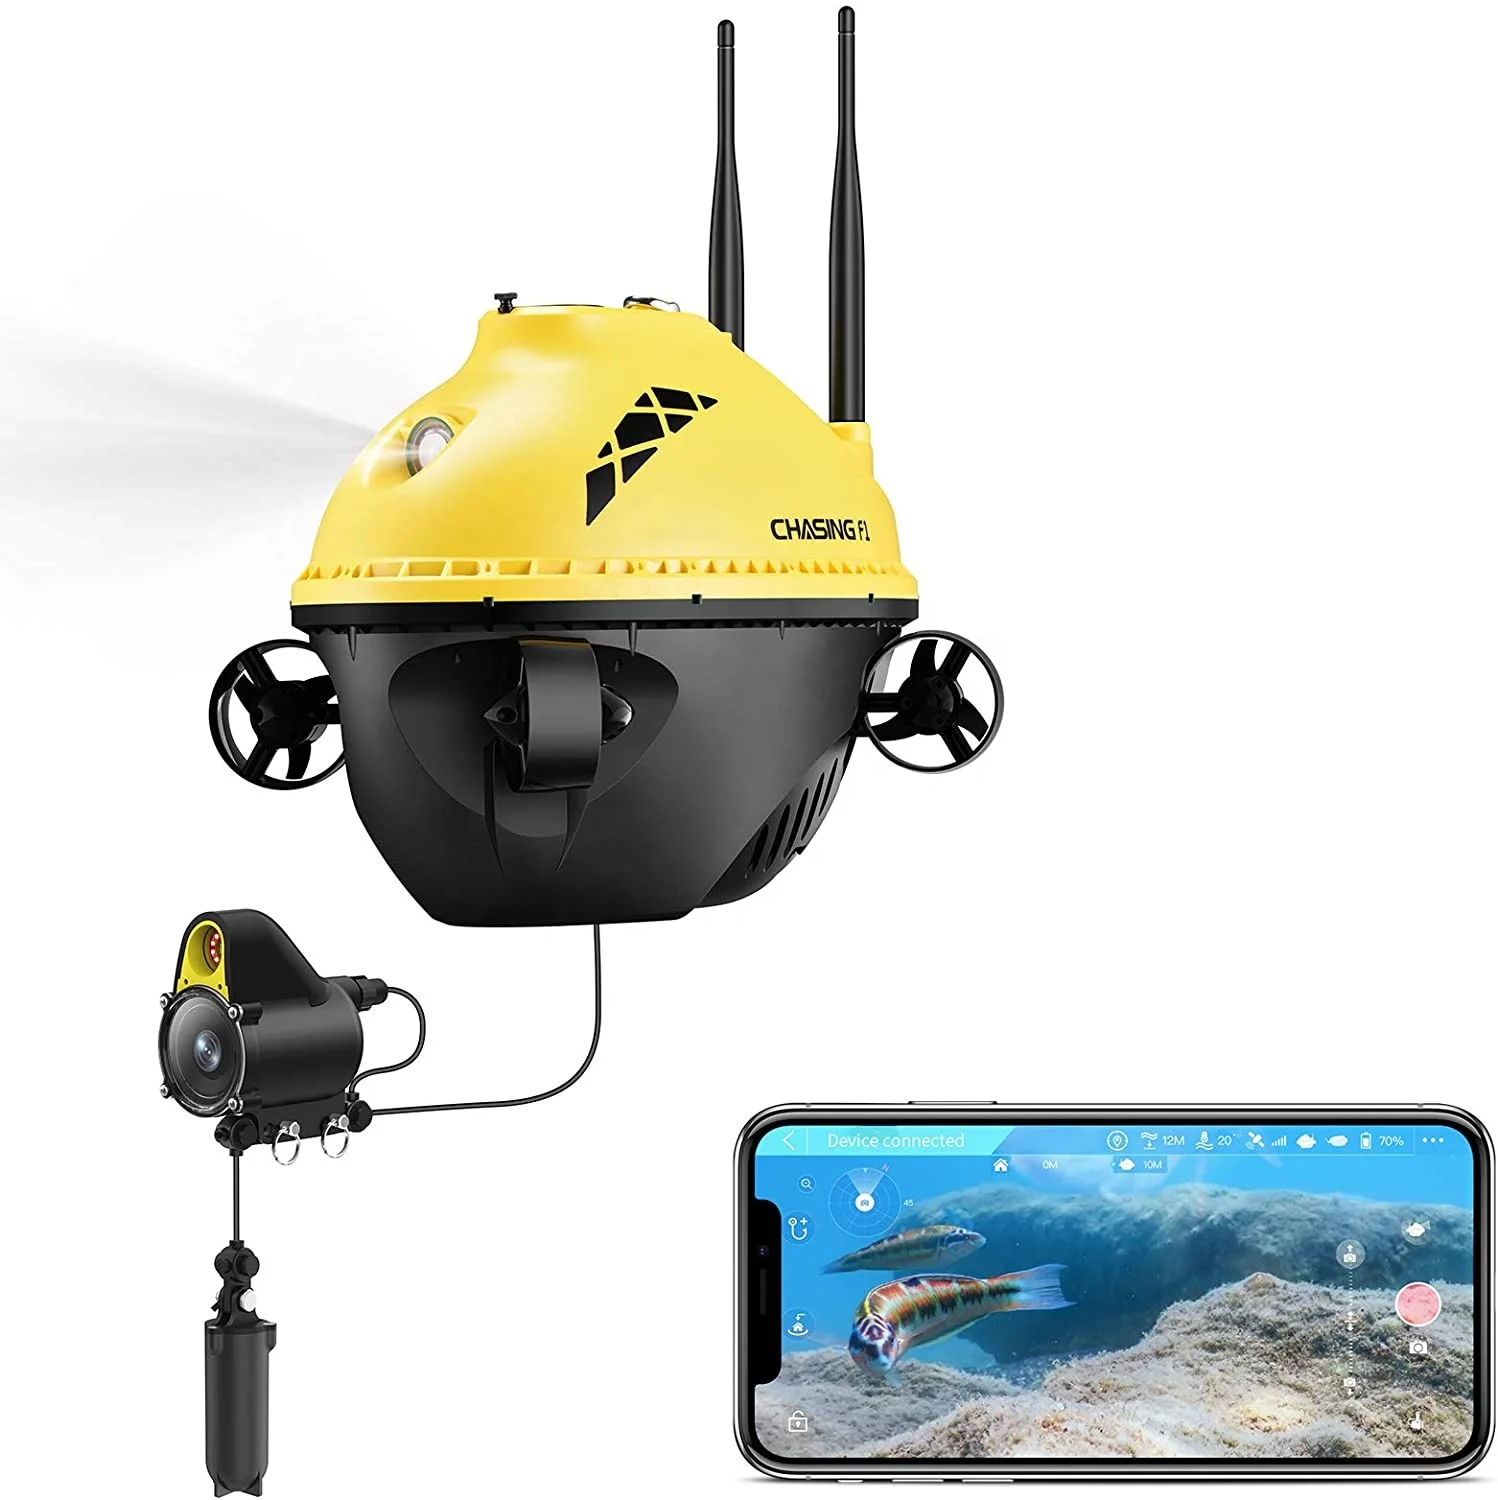 

Chasing F1 Underwater Portable Drone with 1080P Full HD Camera Temperature Detection Real-time Display Ice Fishing ROV